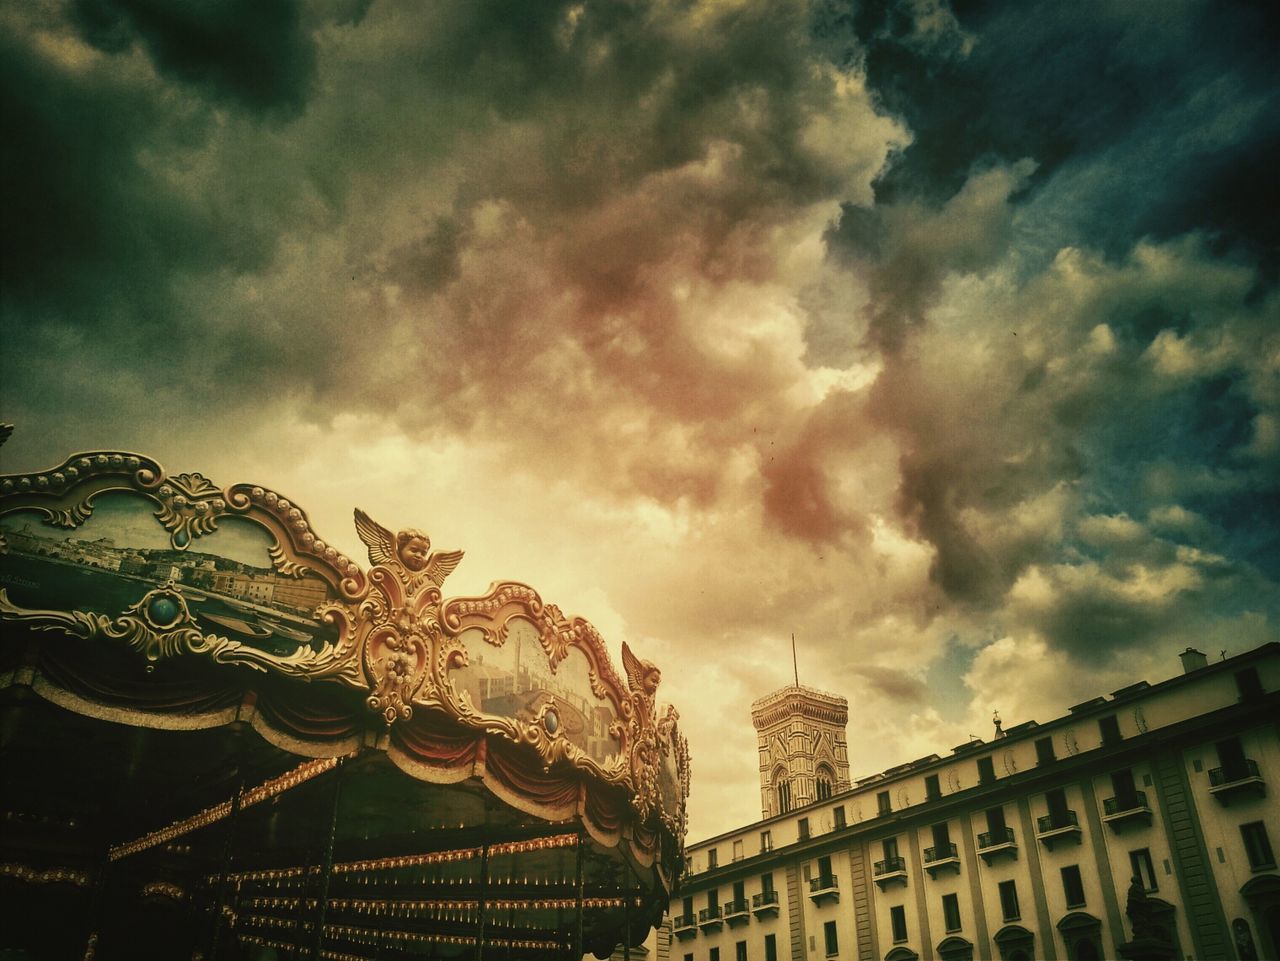 Swing carousel and building against dramatic sky